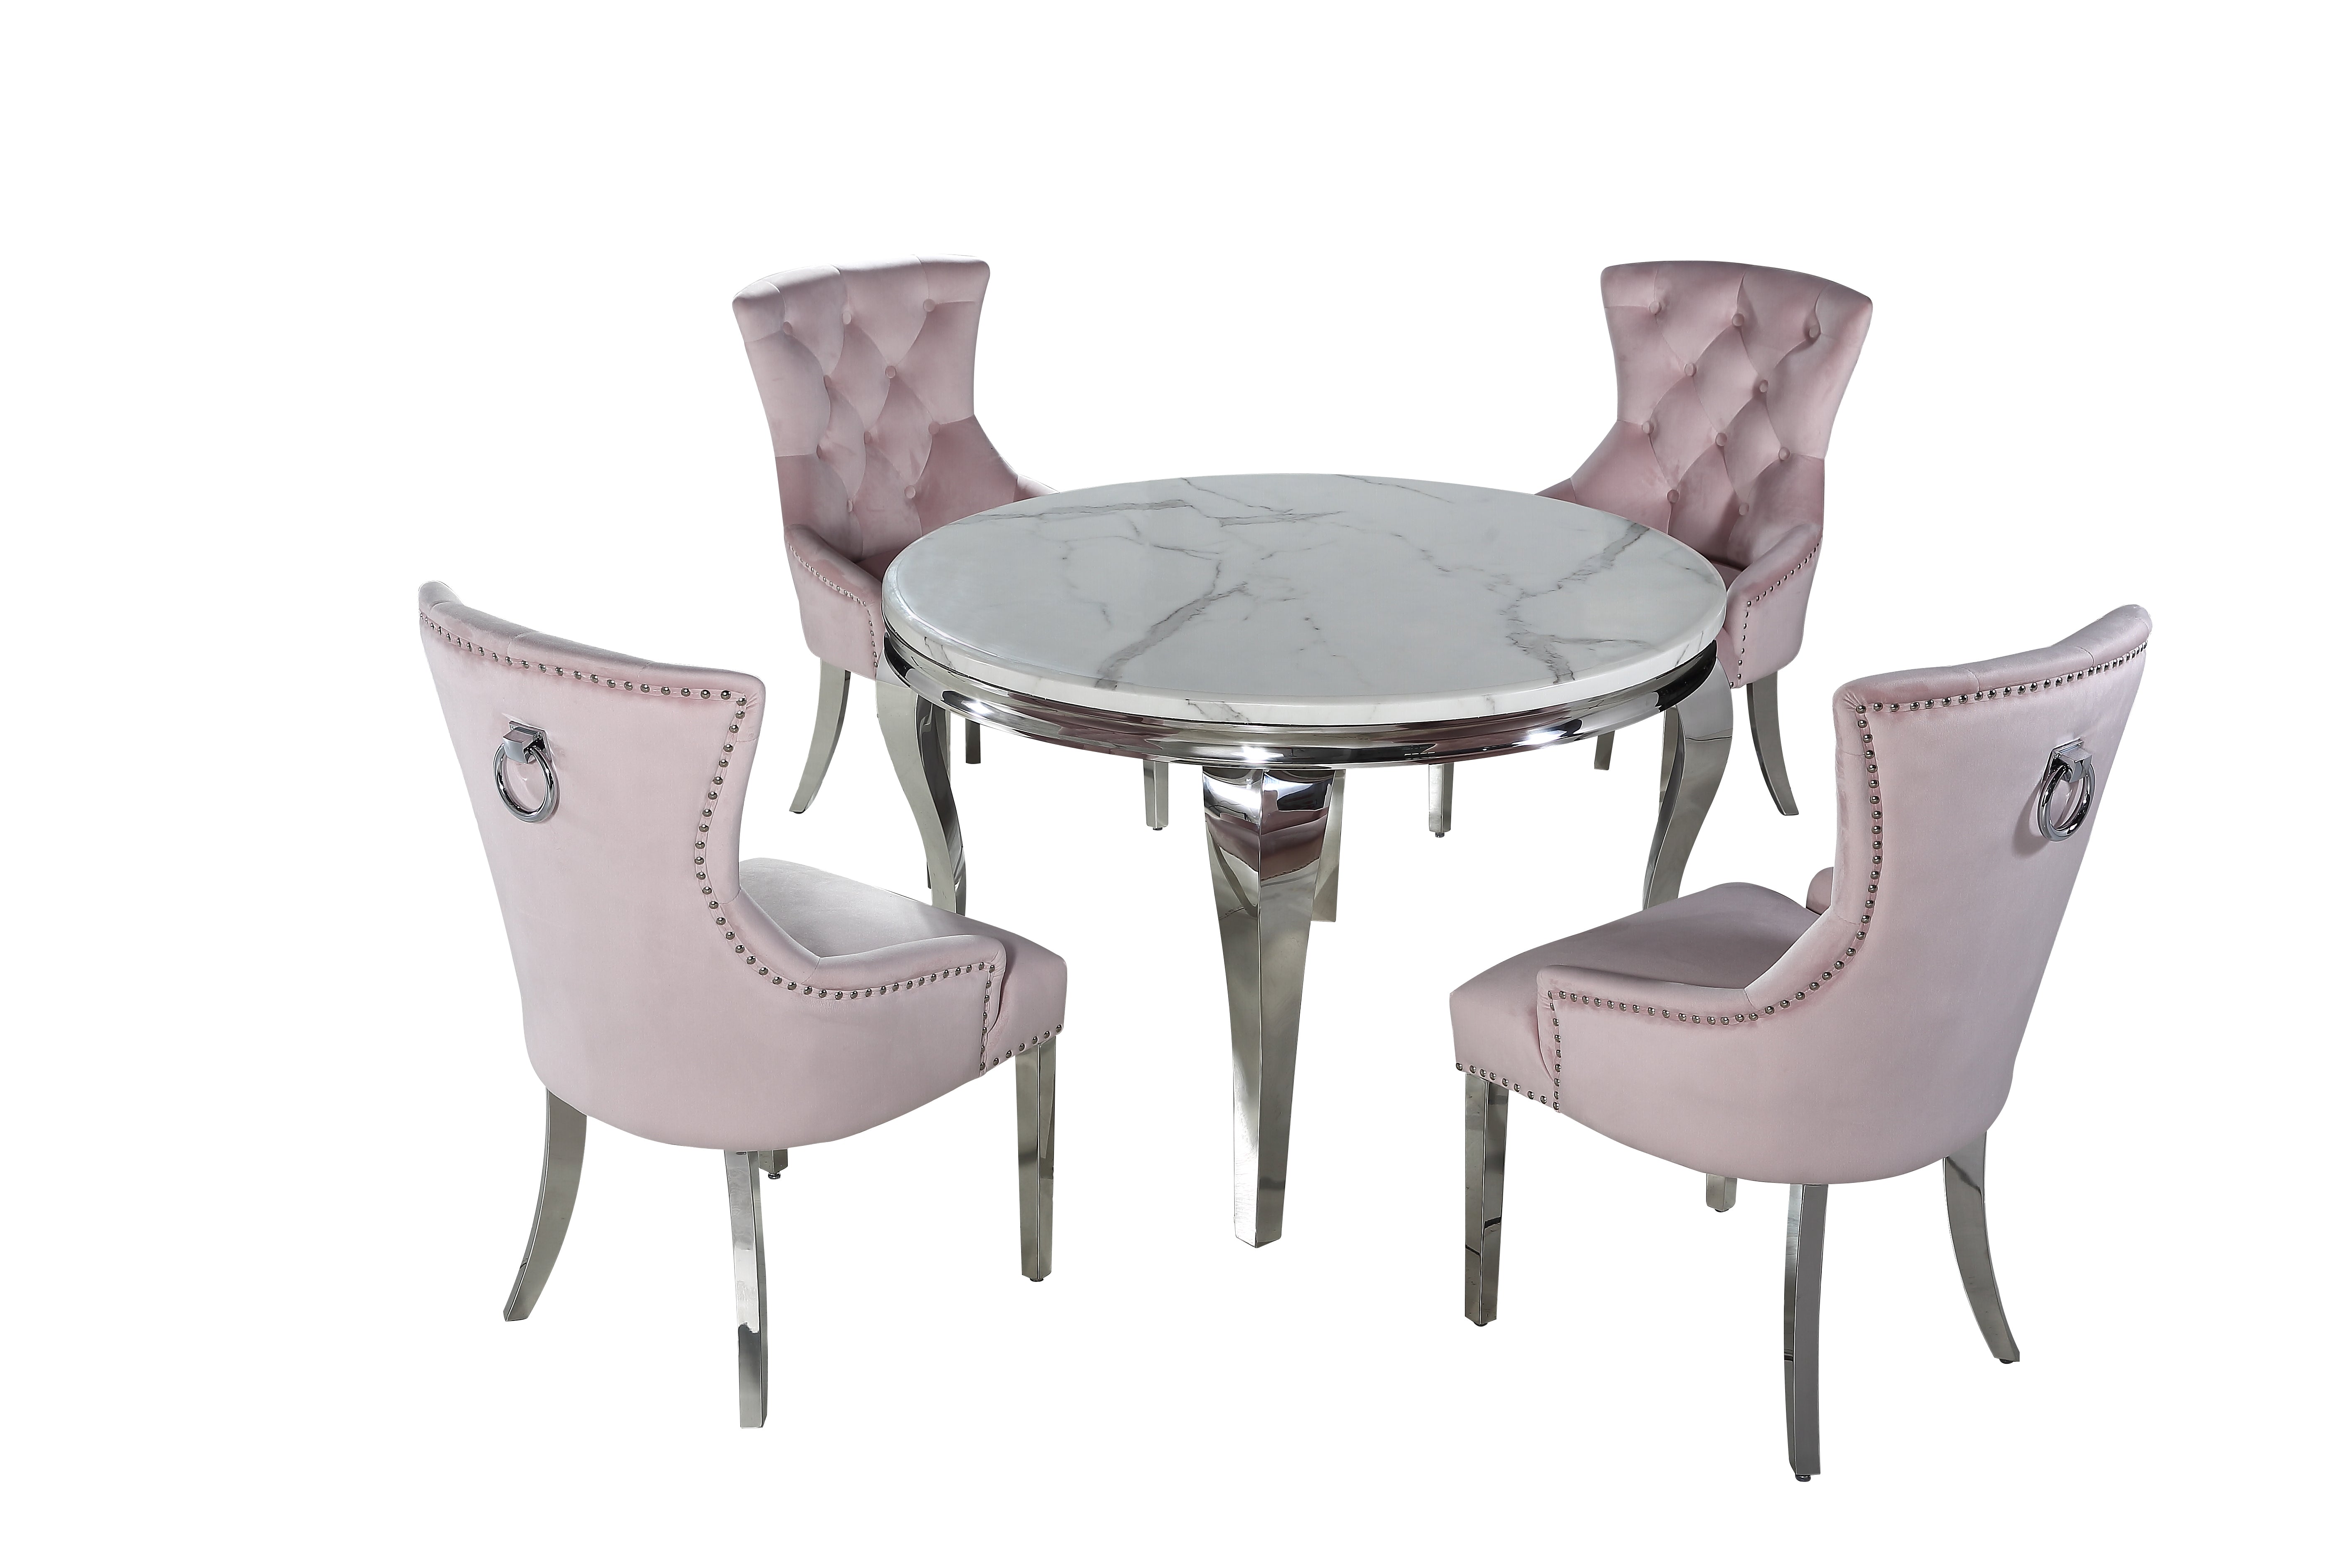 Louis Chrome Marble Round Dining Set with Megan Pink Chairs